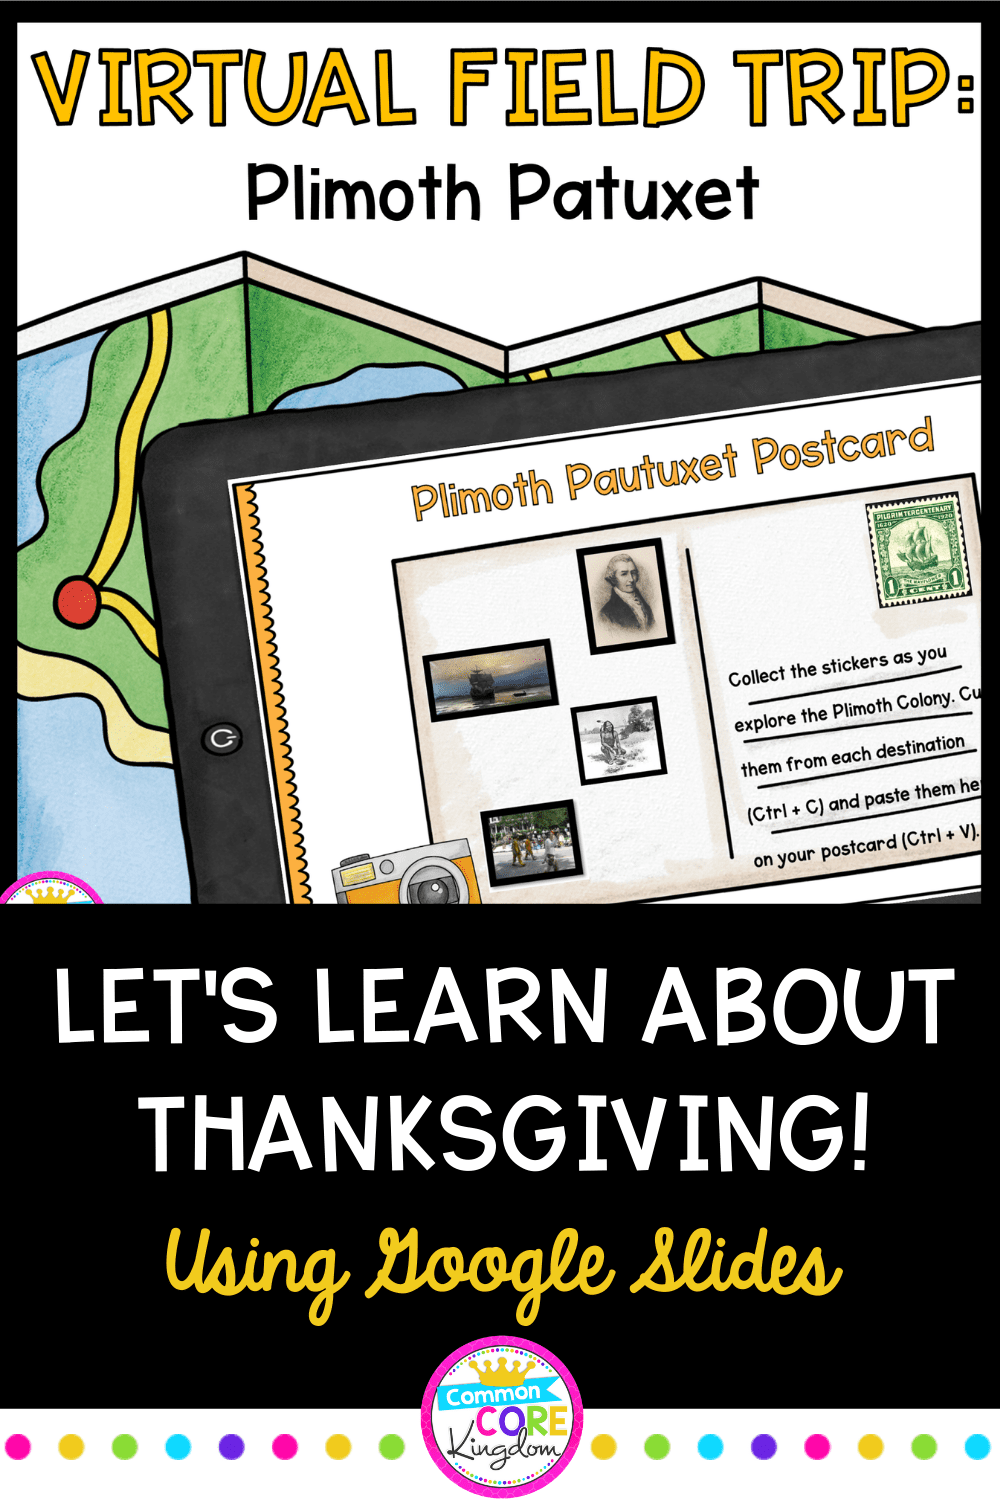 Let's Learn About Thanksgiving on a Virtual Trip to Plimoth Patuxet